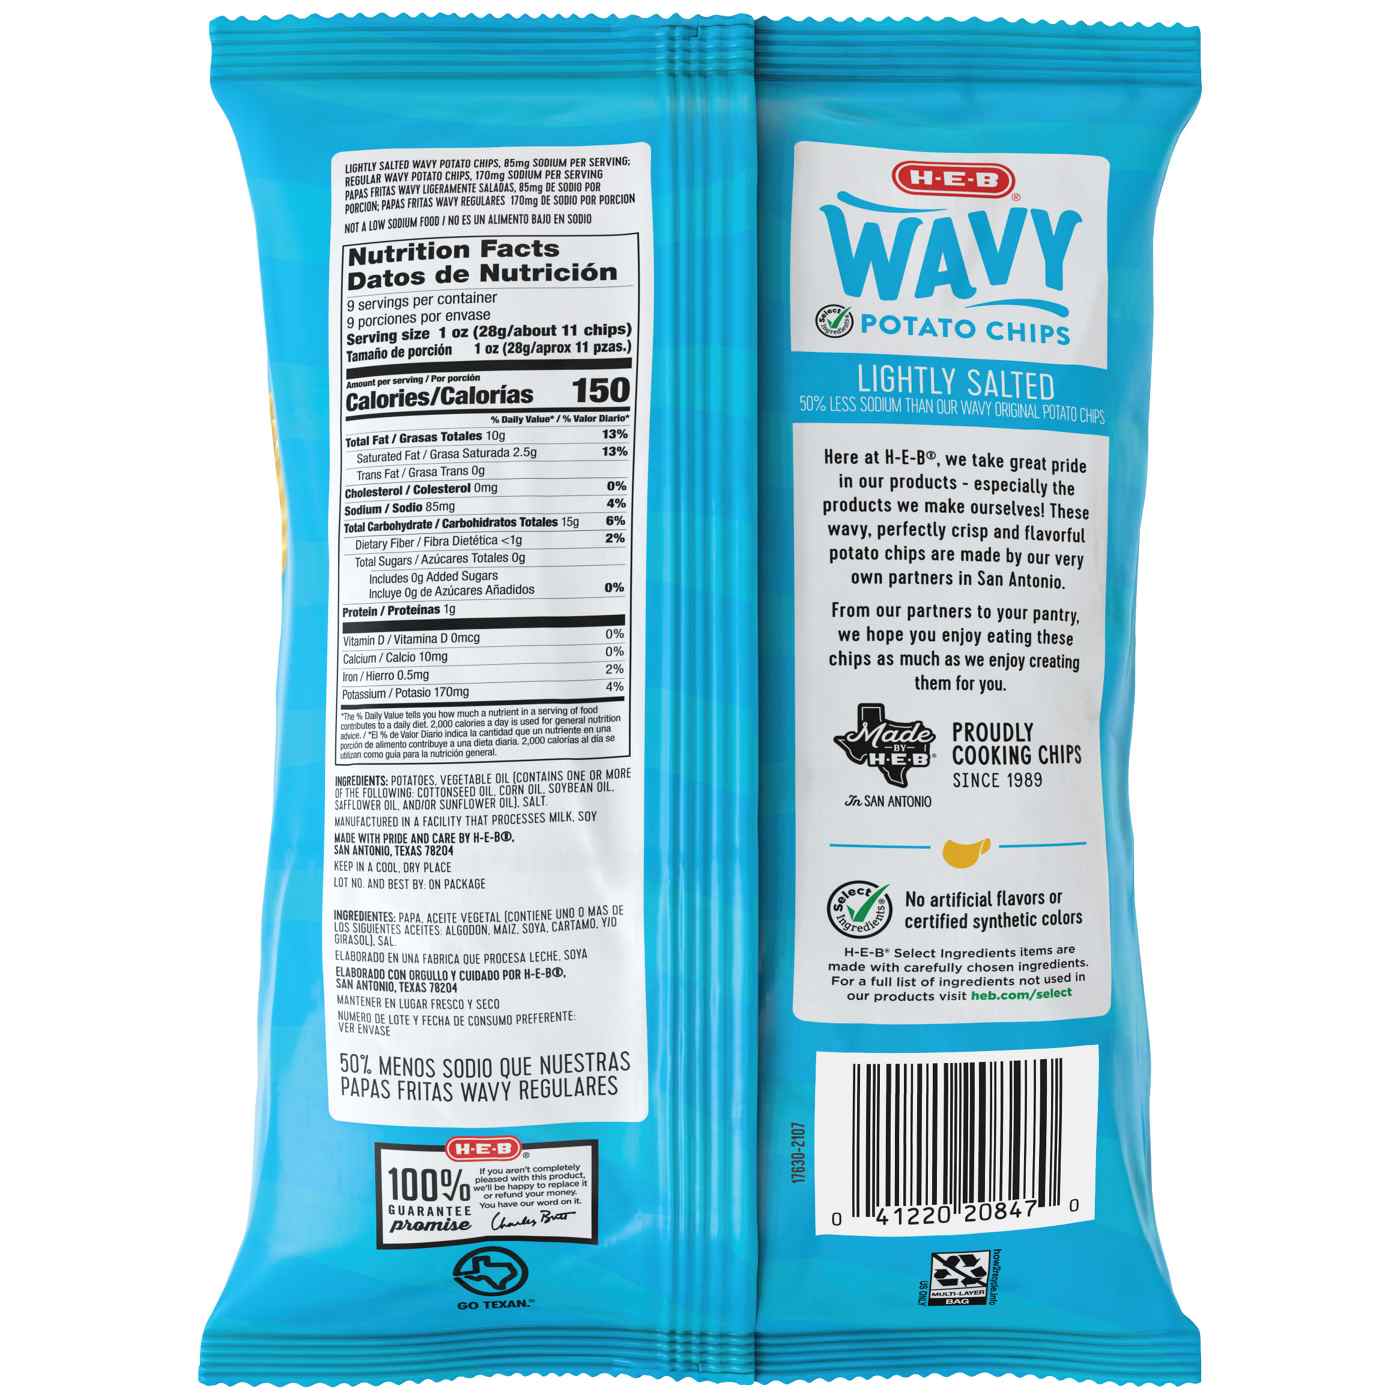 H-E-B Wavy Potato Chips - Lightly Salted; image 3 of 3